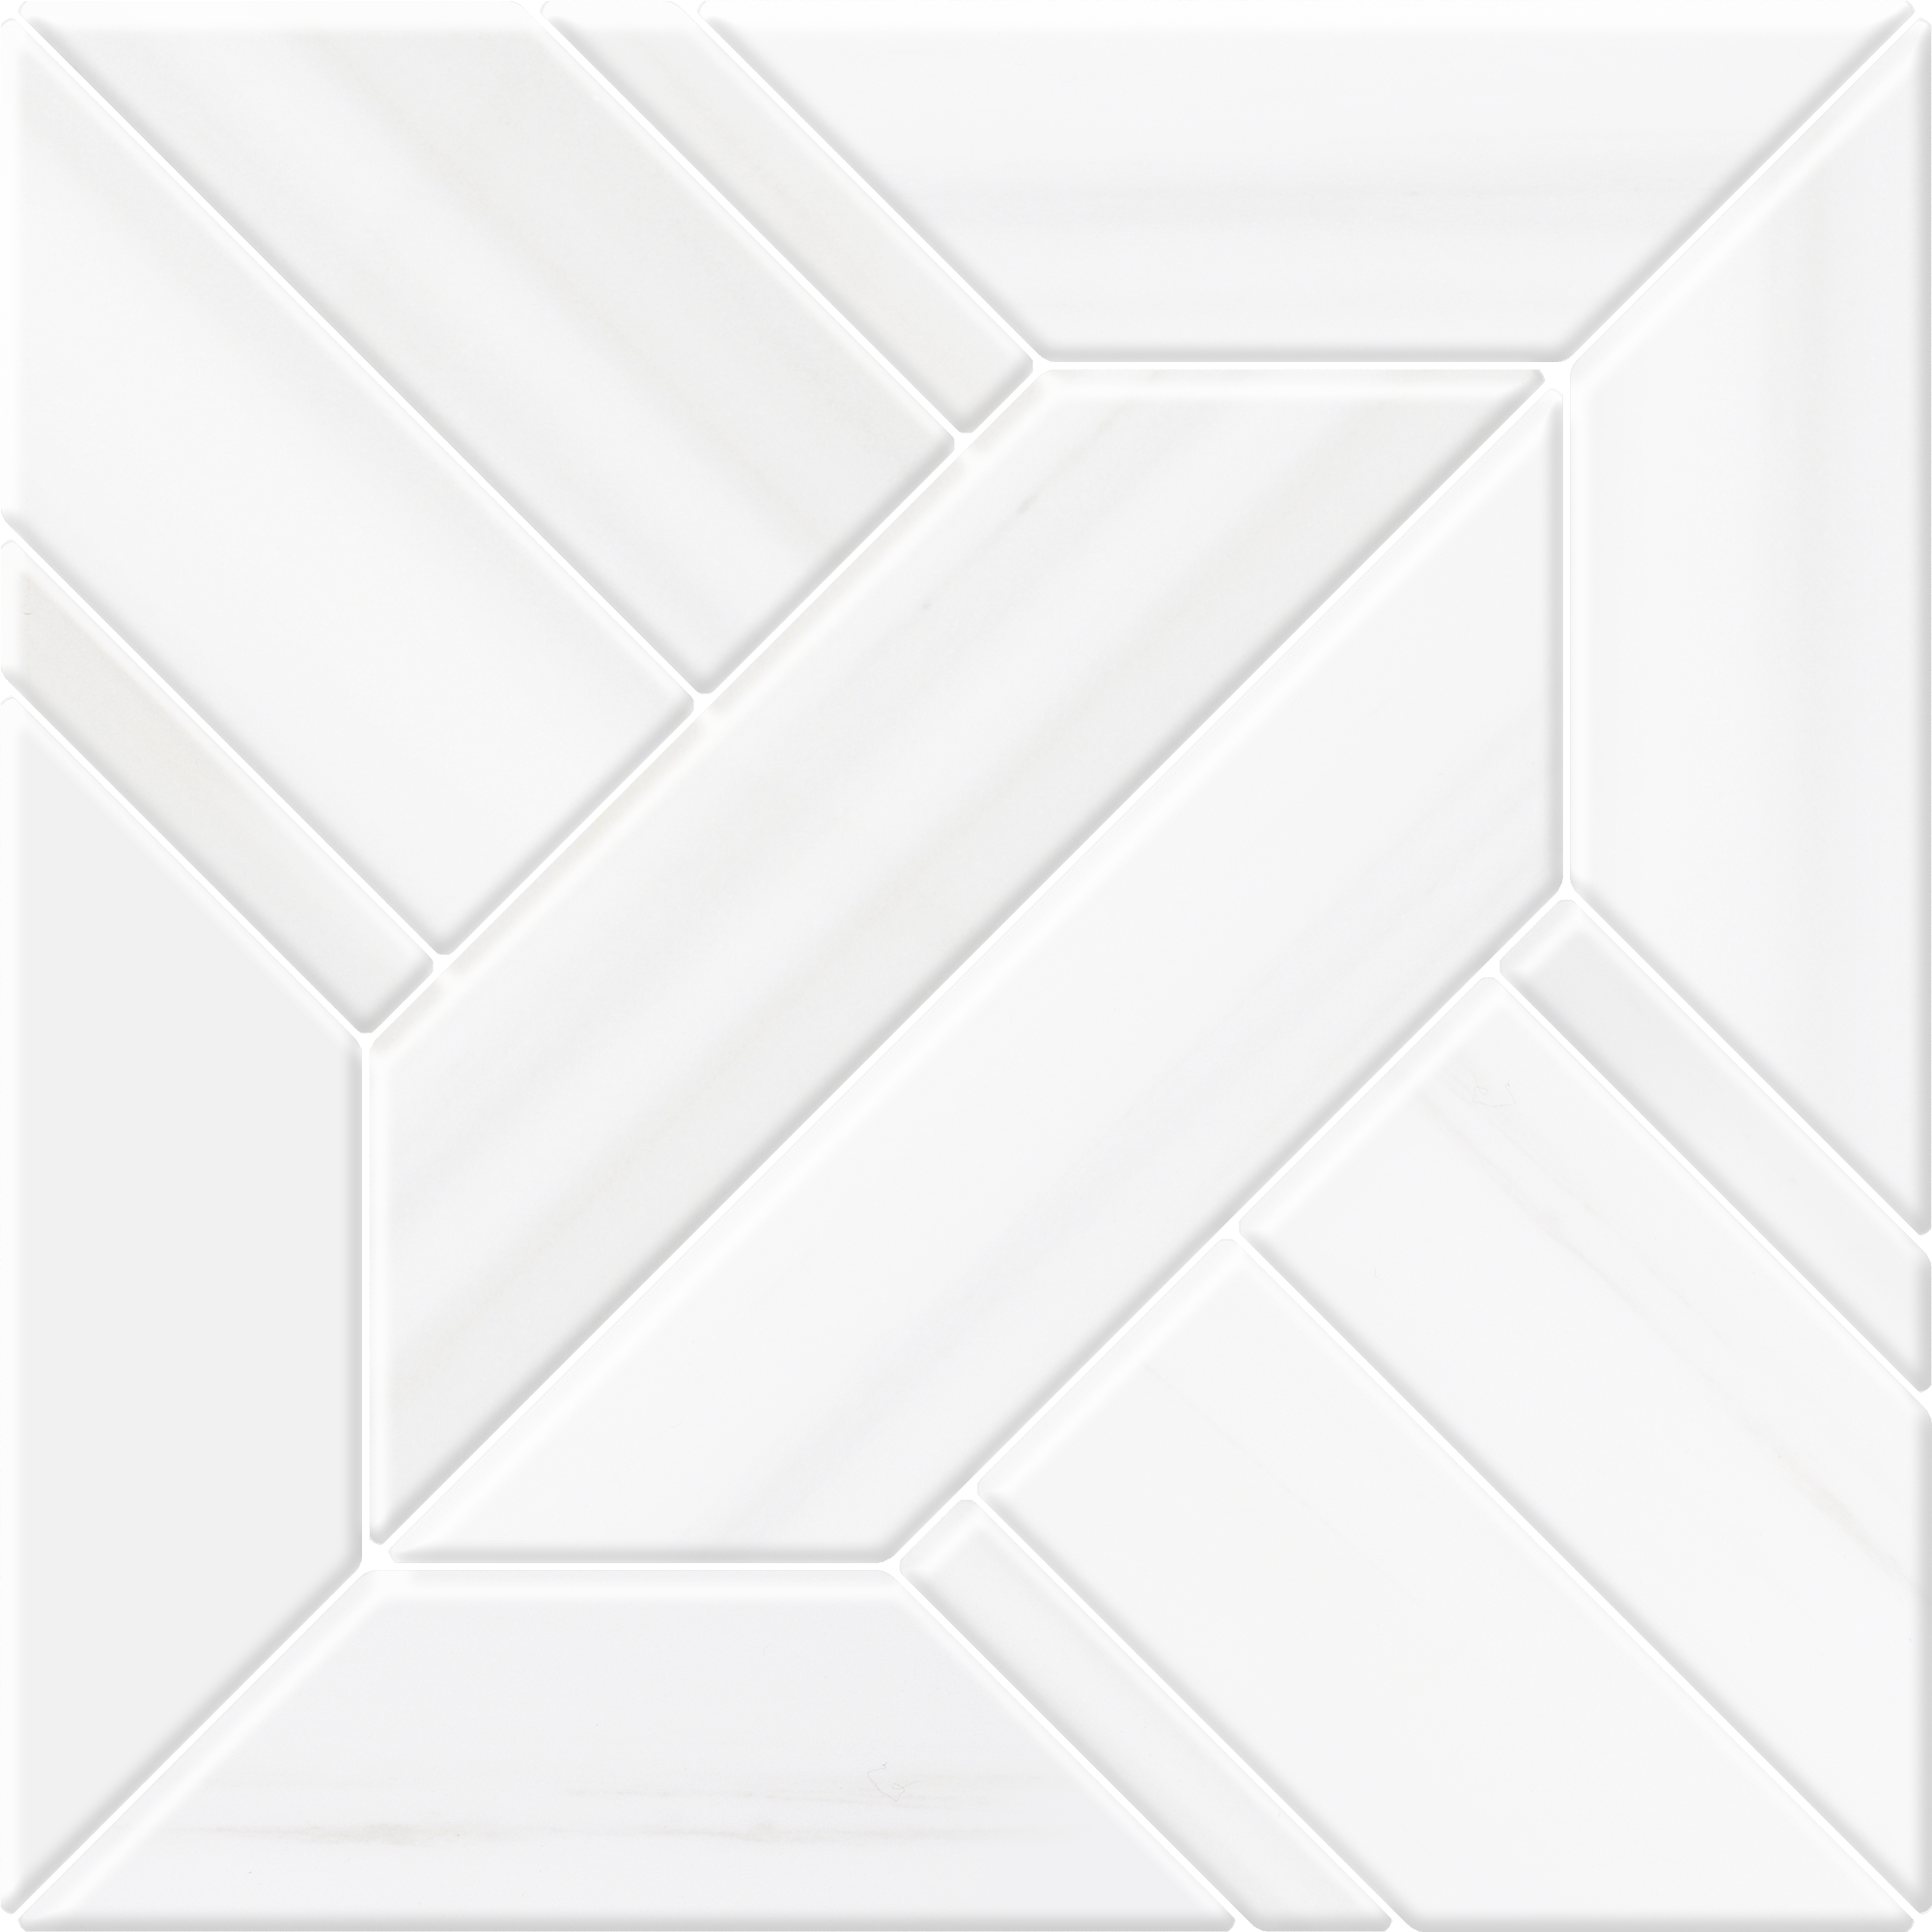 dulcet artmore white 1matmdol natural stone mosaic product sheet made by dulcet and sold by surface group international